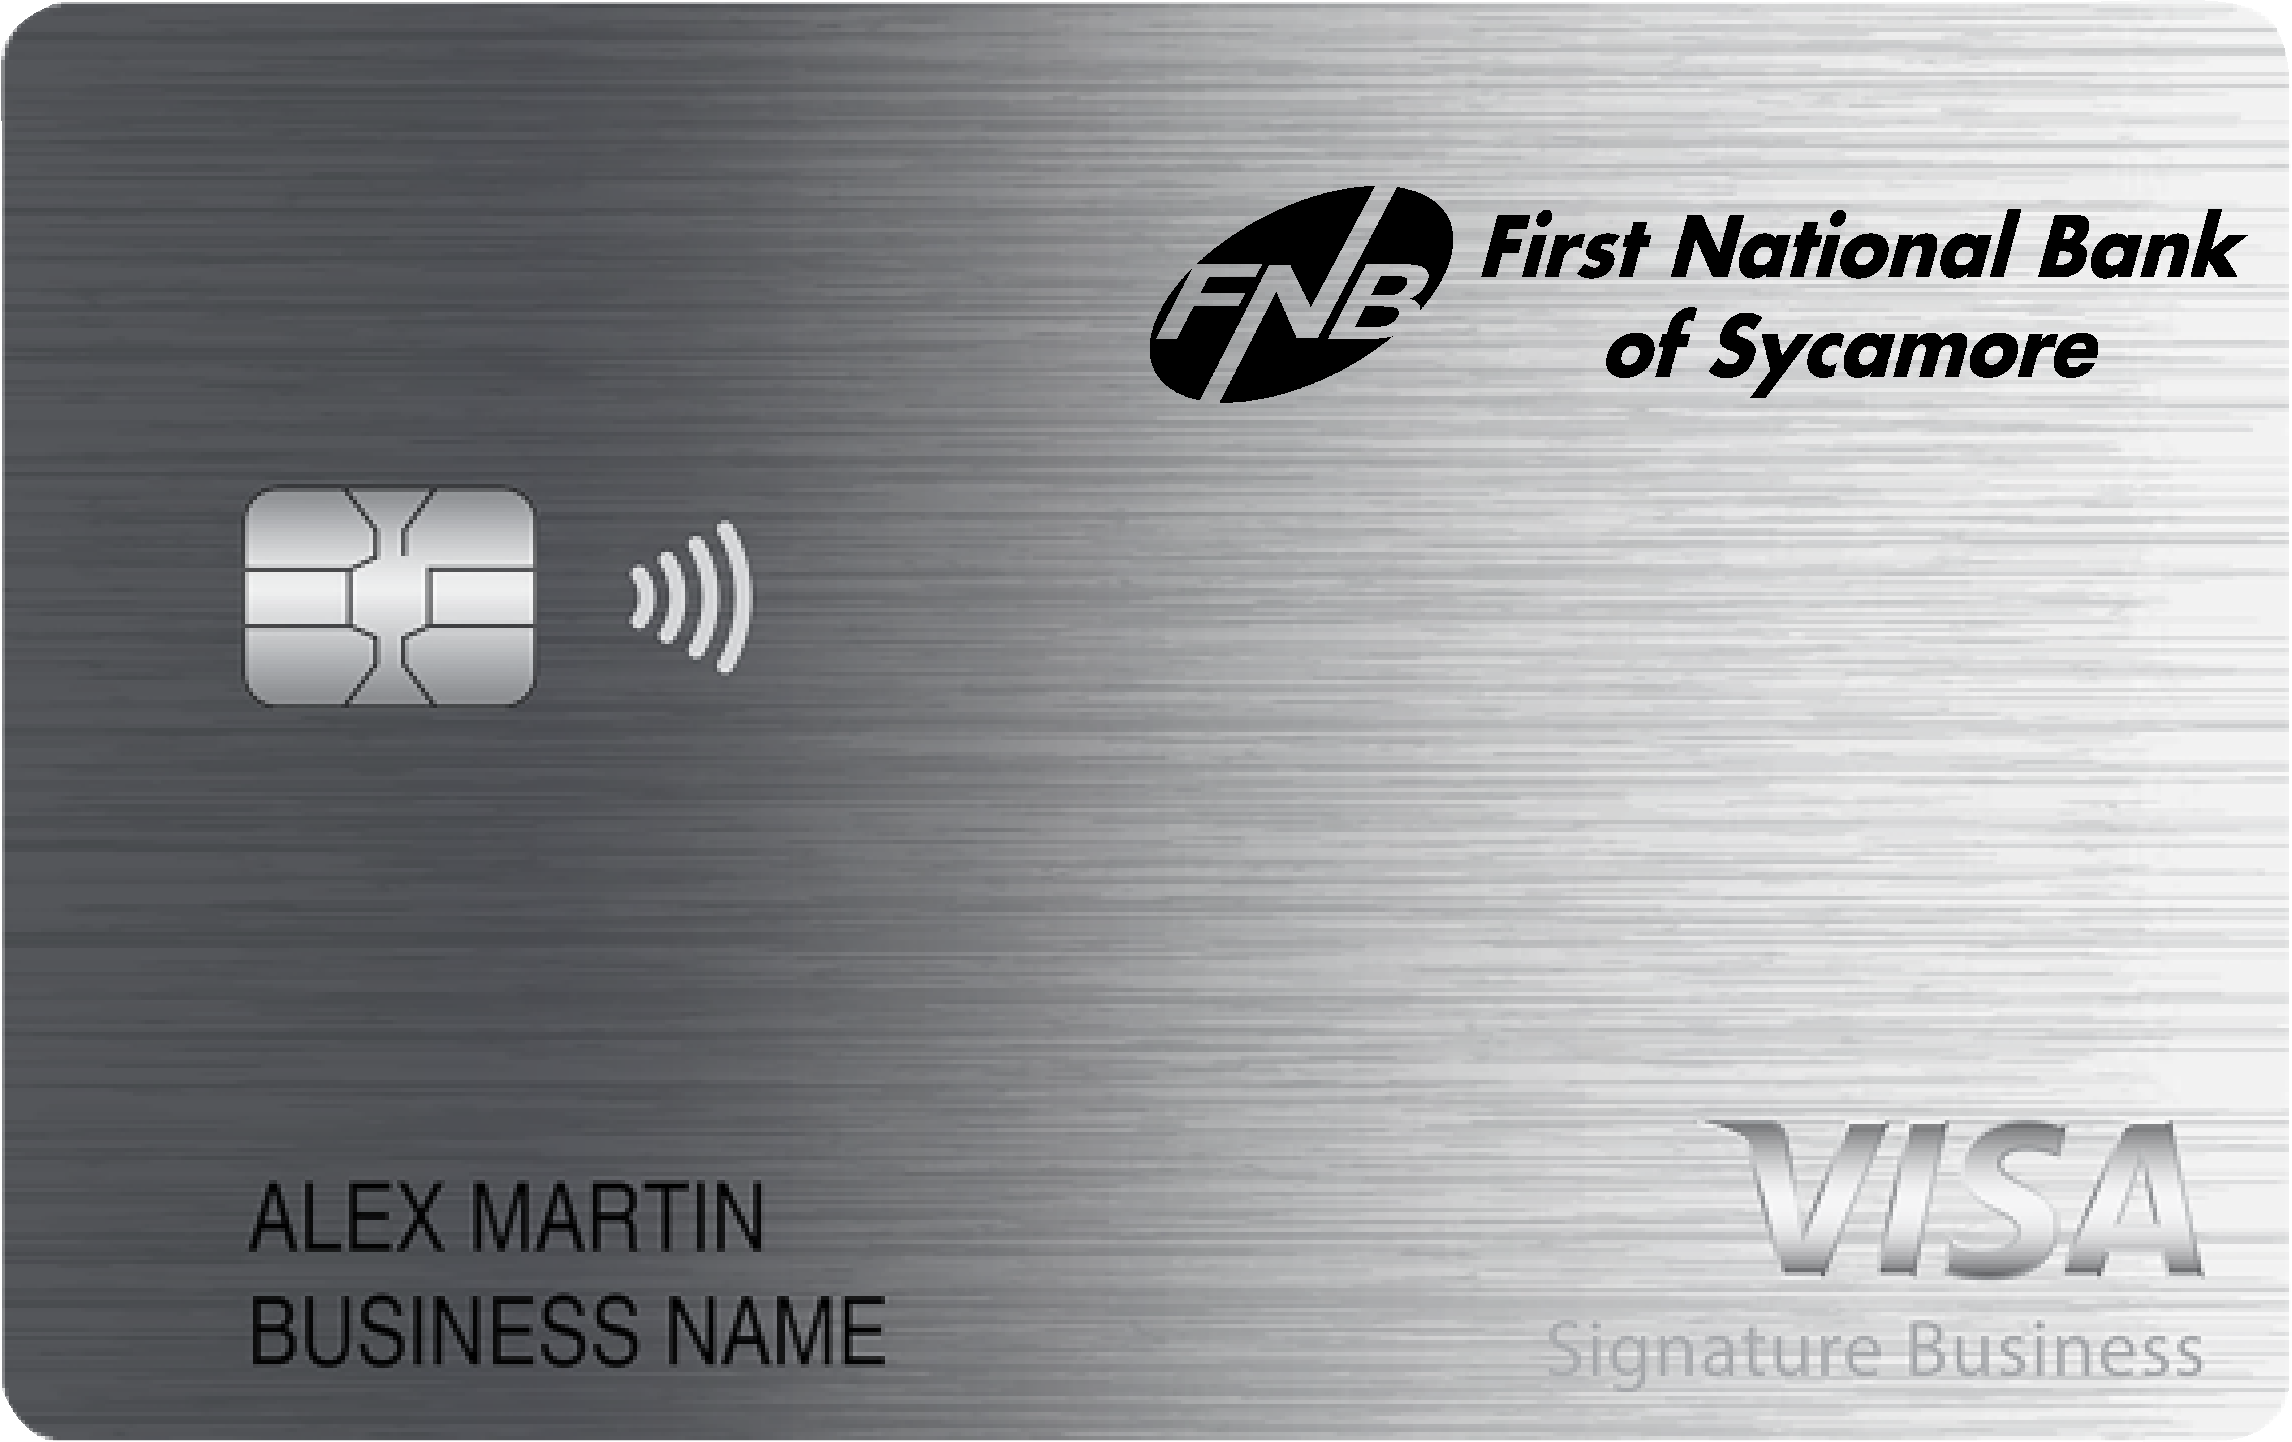 First National Bank of Sycamore Smart Business Rewards Card